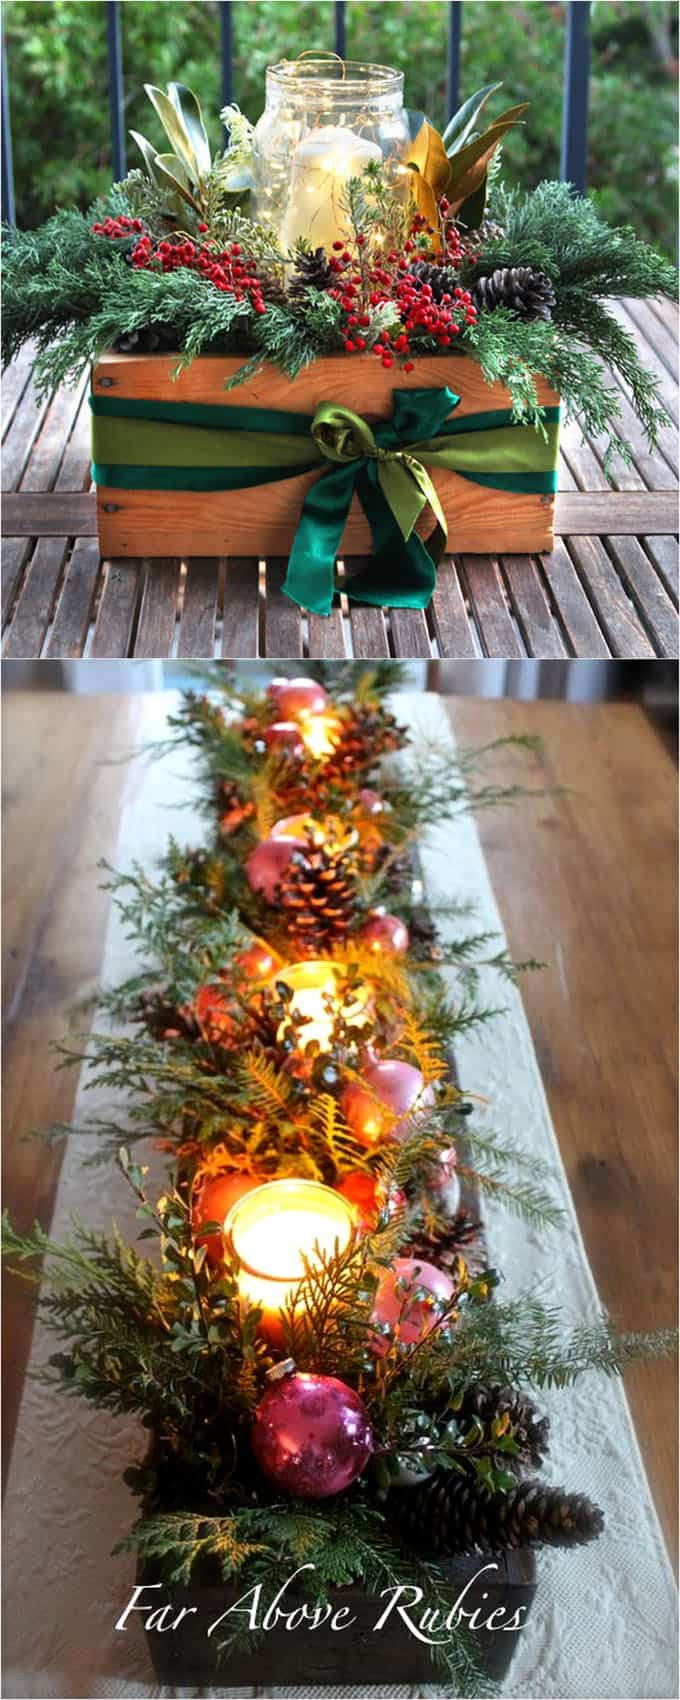 DIY Christmas Table Centerpieces
 27 Gorgeous DIY Thanksgiving & Christmas Table Decorations